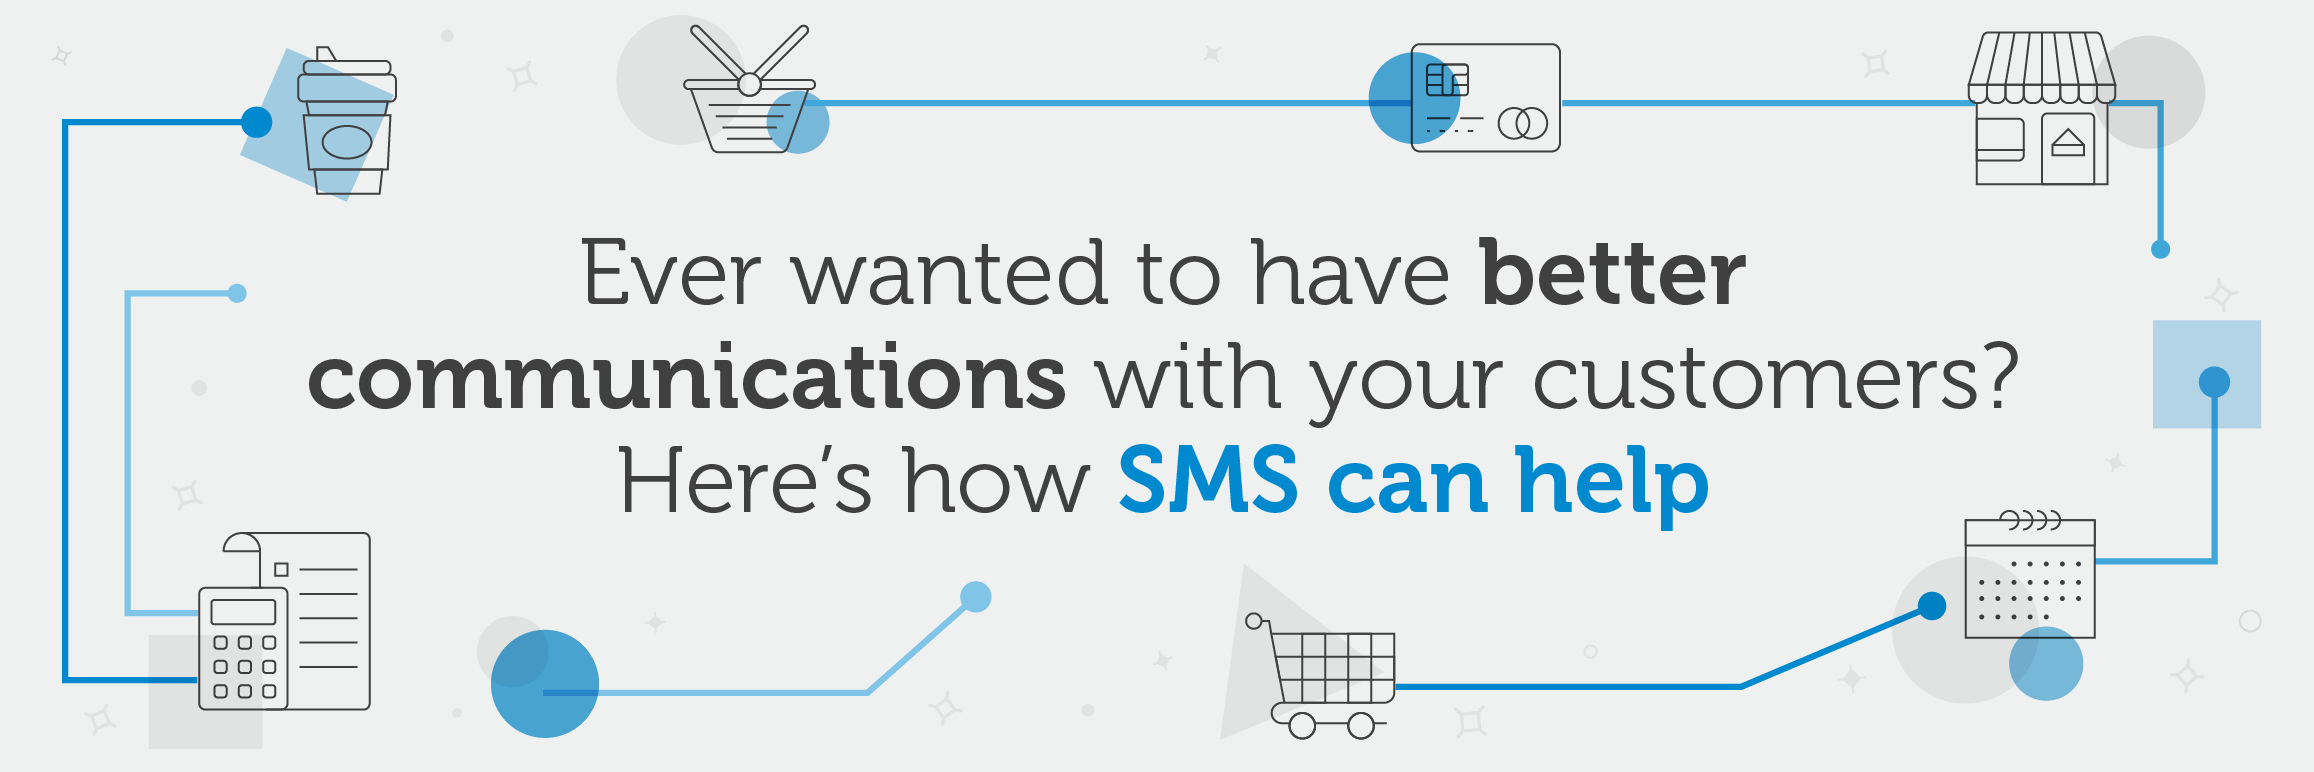 How SMS can help with your customer comms infographic